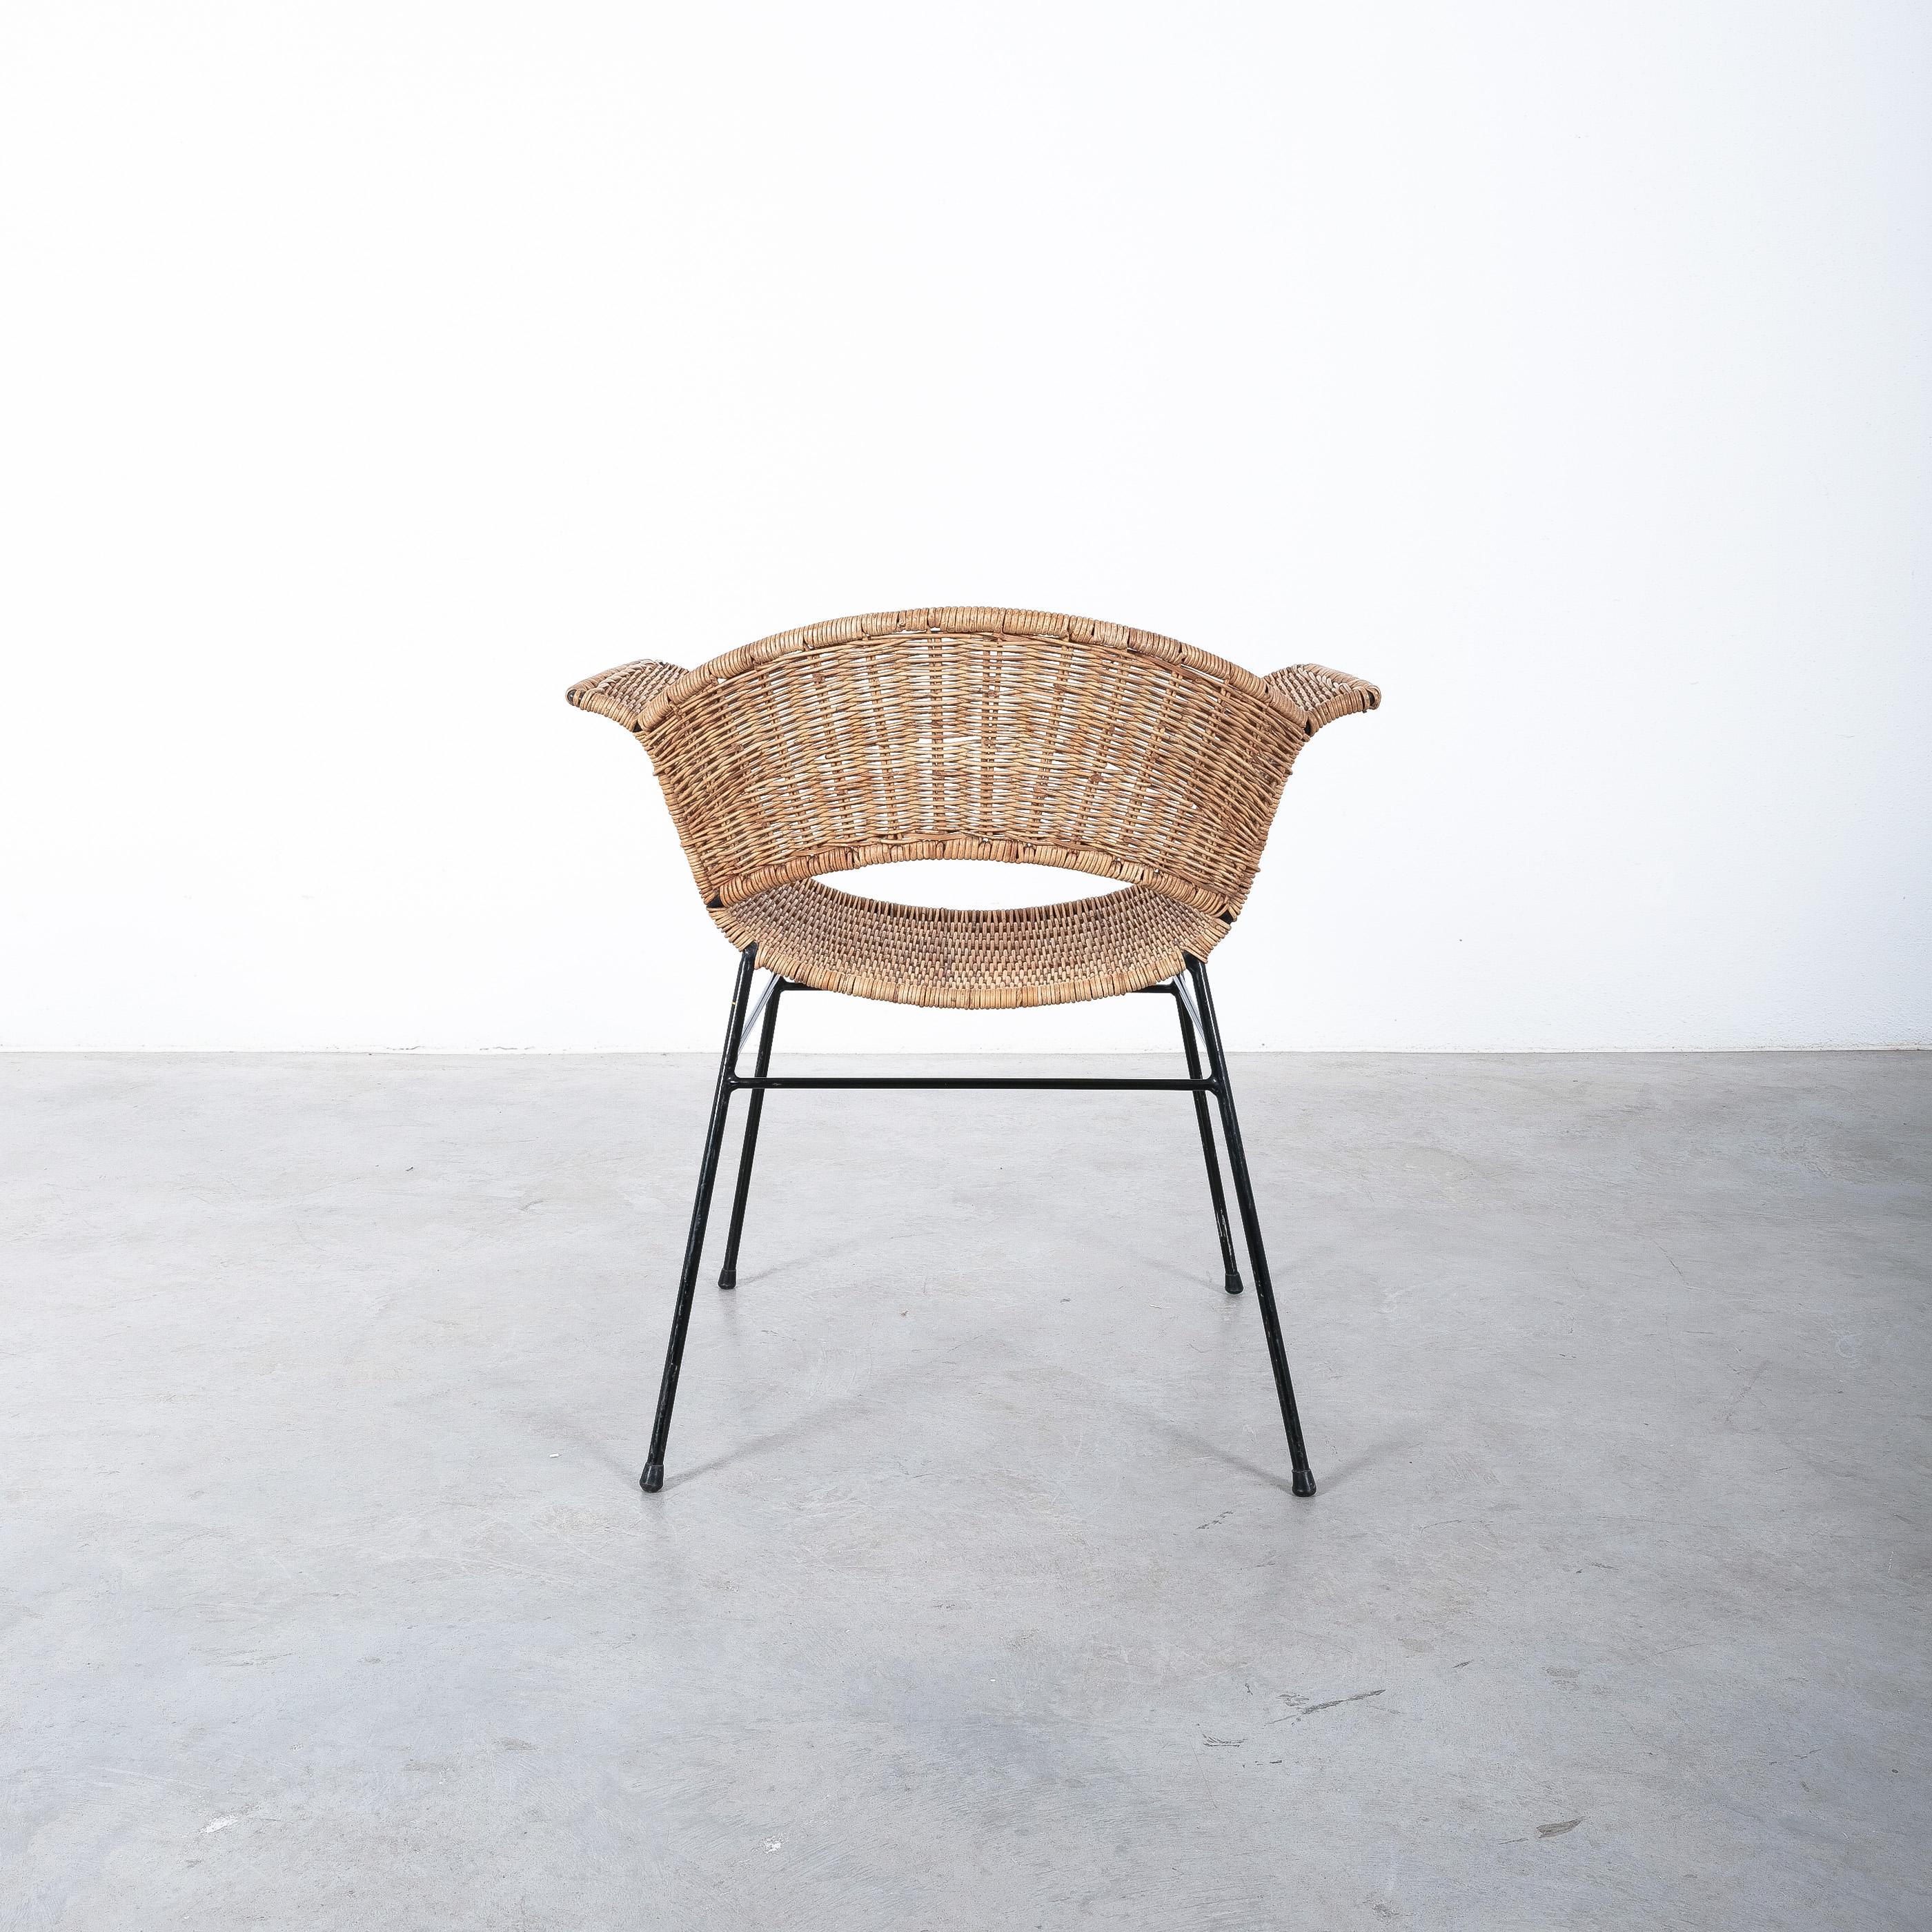 Anna-Lülja Praun attr. wicker chair and ottoman, Austria, 1950s

Mid-century chair and ottoman made from woven cane. 
Both show minor wear and are stable and undamaged with repairs to the wicker. 
Dimensions are 21.26